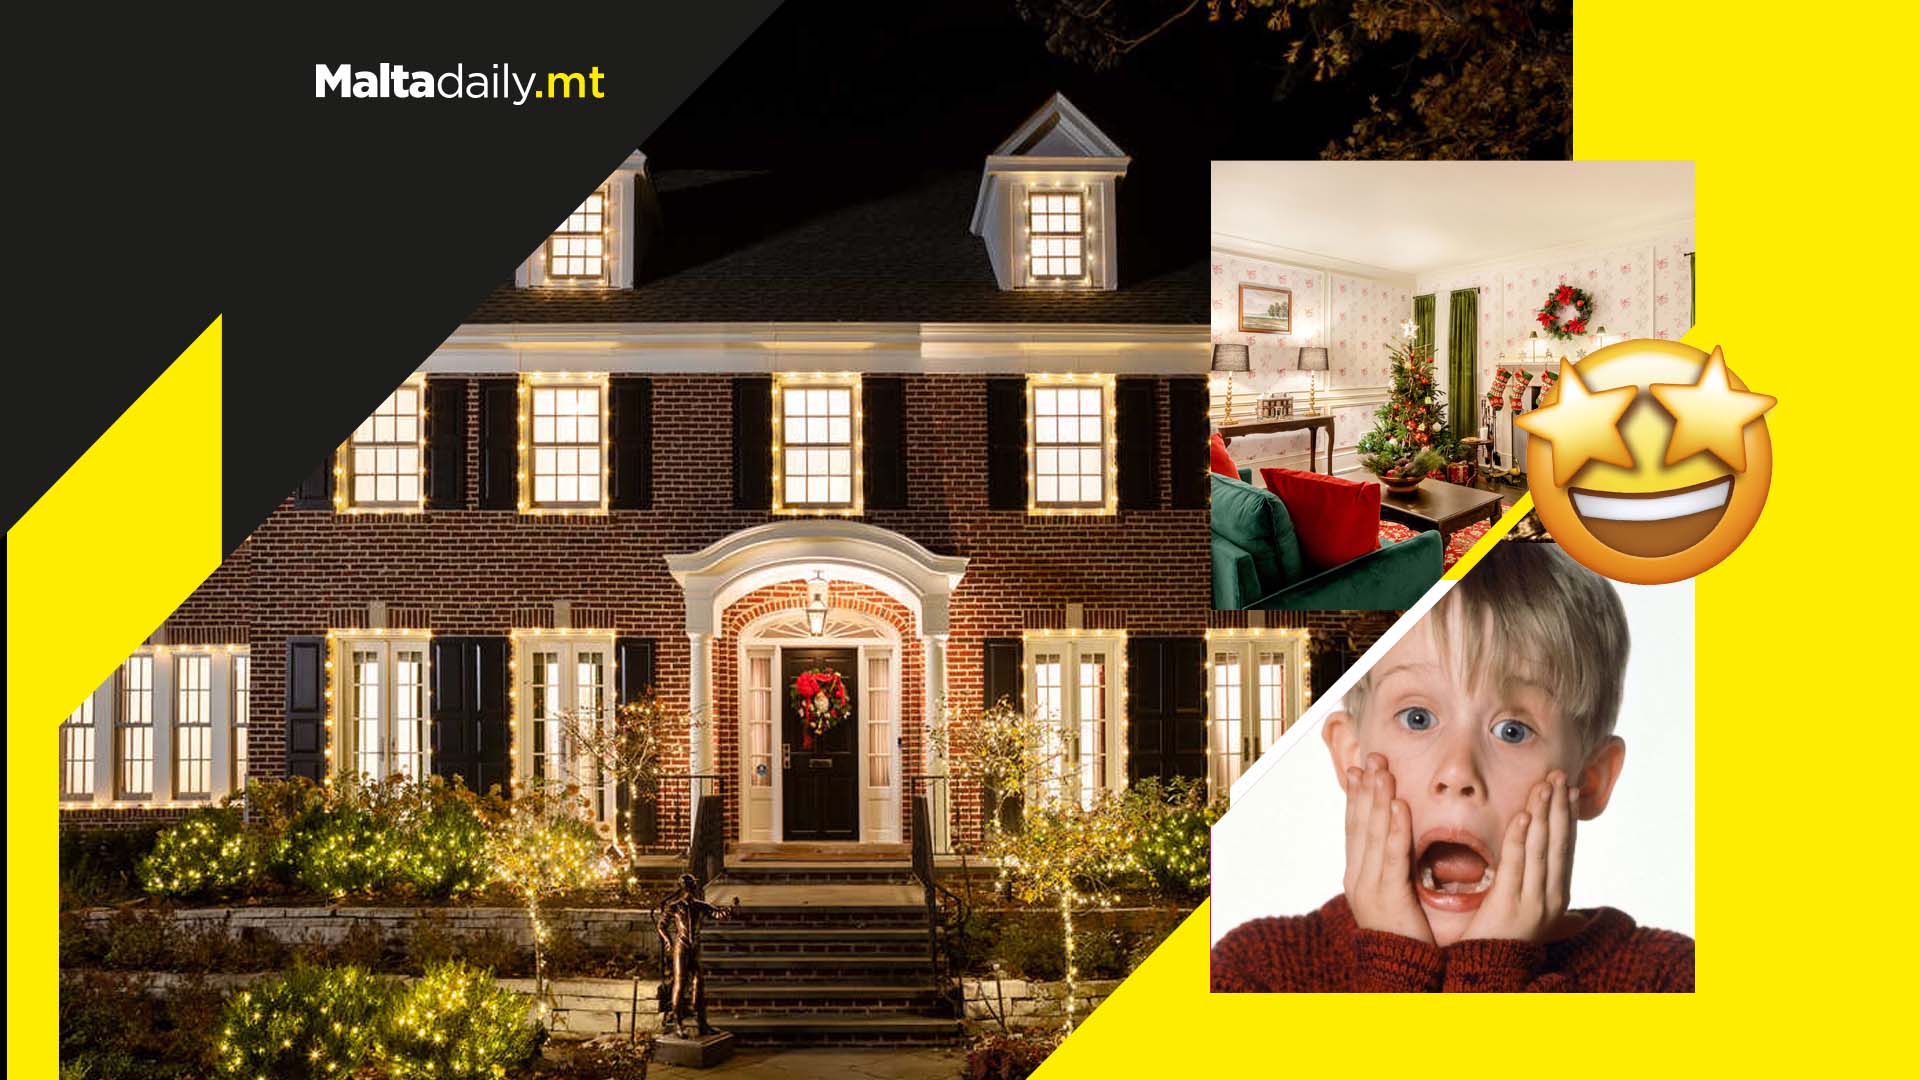 The 'Home Alone' house can actually be rented for one night